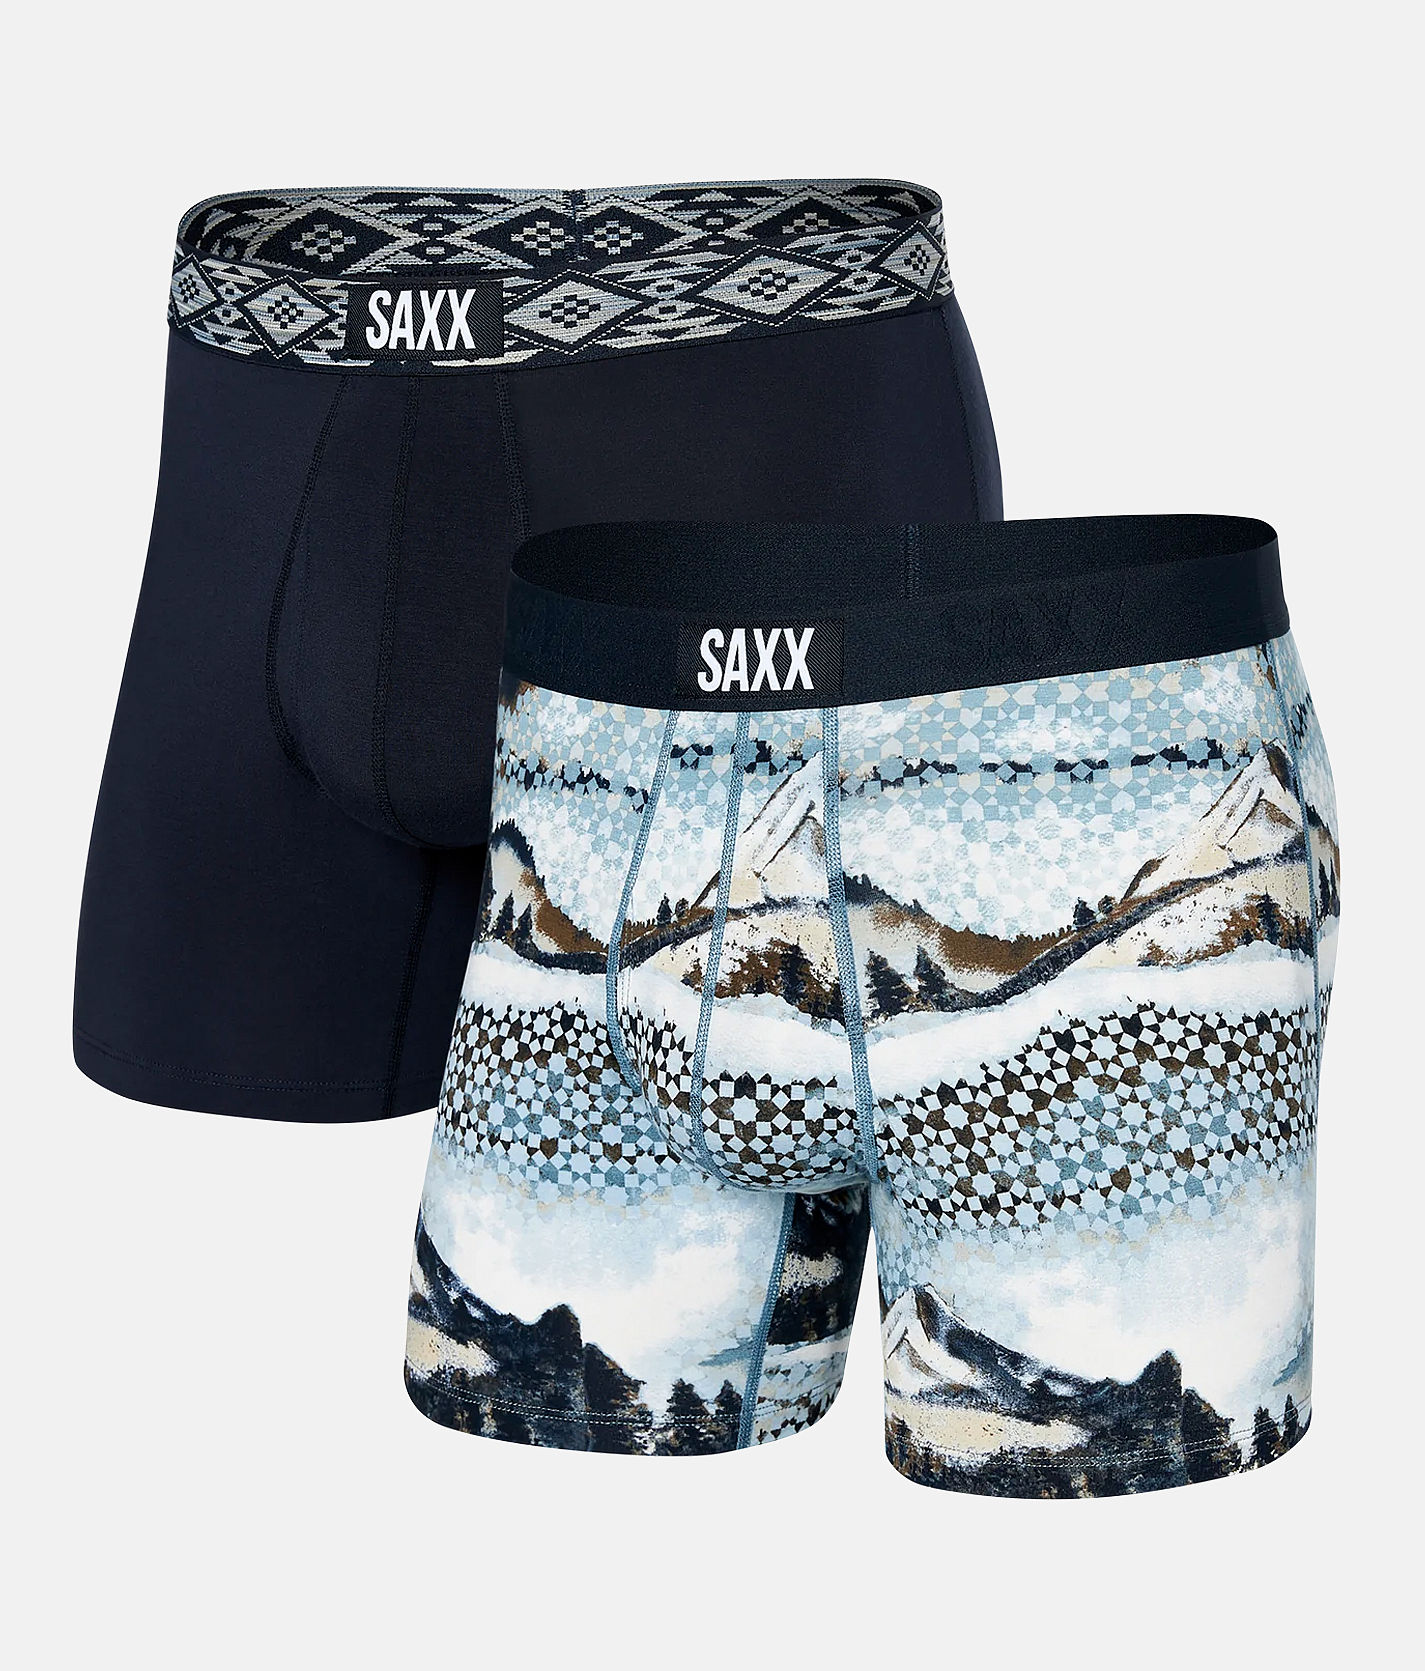 SAXX Ultra Super Soft 2 Pack Stretch Boxer Briefs - Men's Boxers in Foggy  Mountains Ink Asher